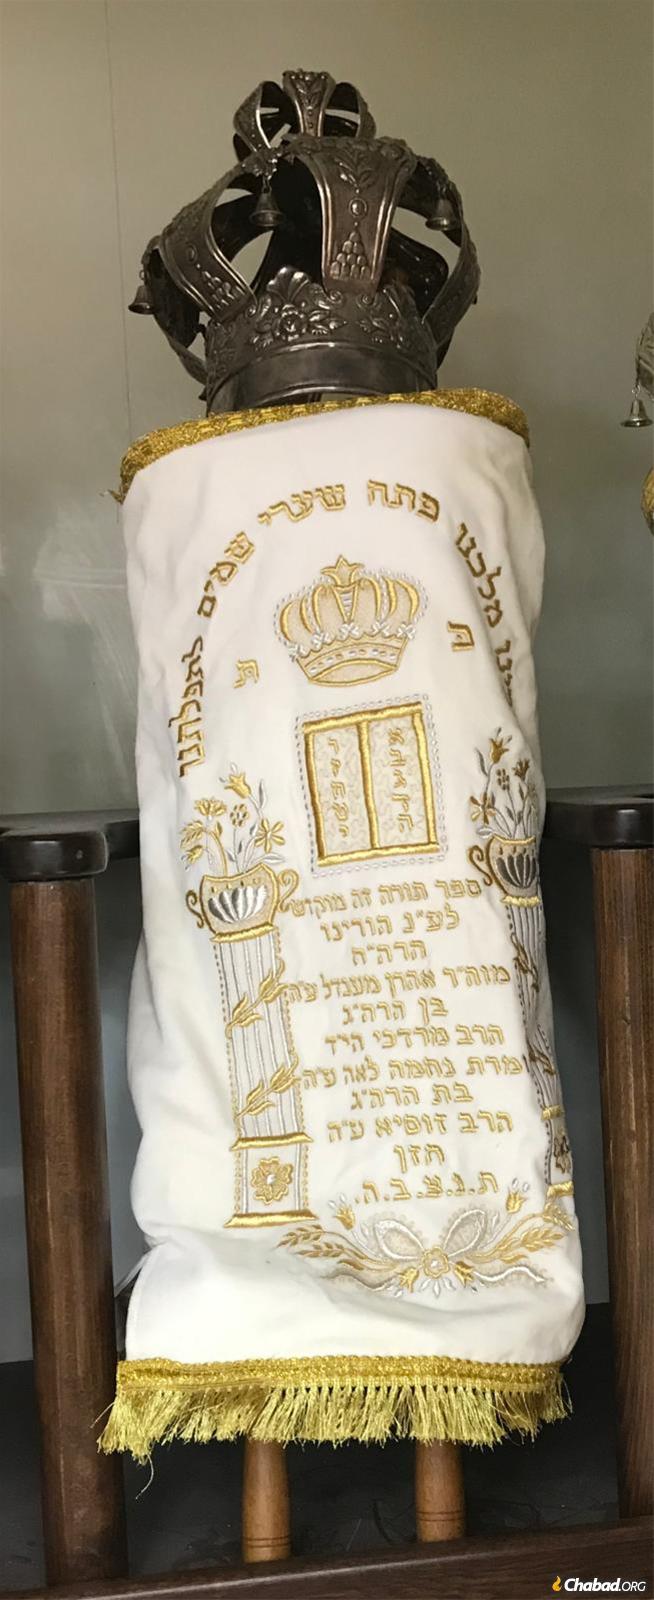 The Tula Torah in its white High Holiday mantle, dedicated to the memory of Rabbi Aharon and Nechamah Leah Chazan.